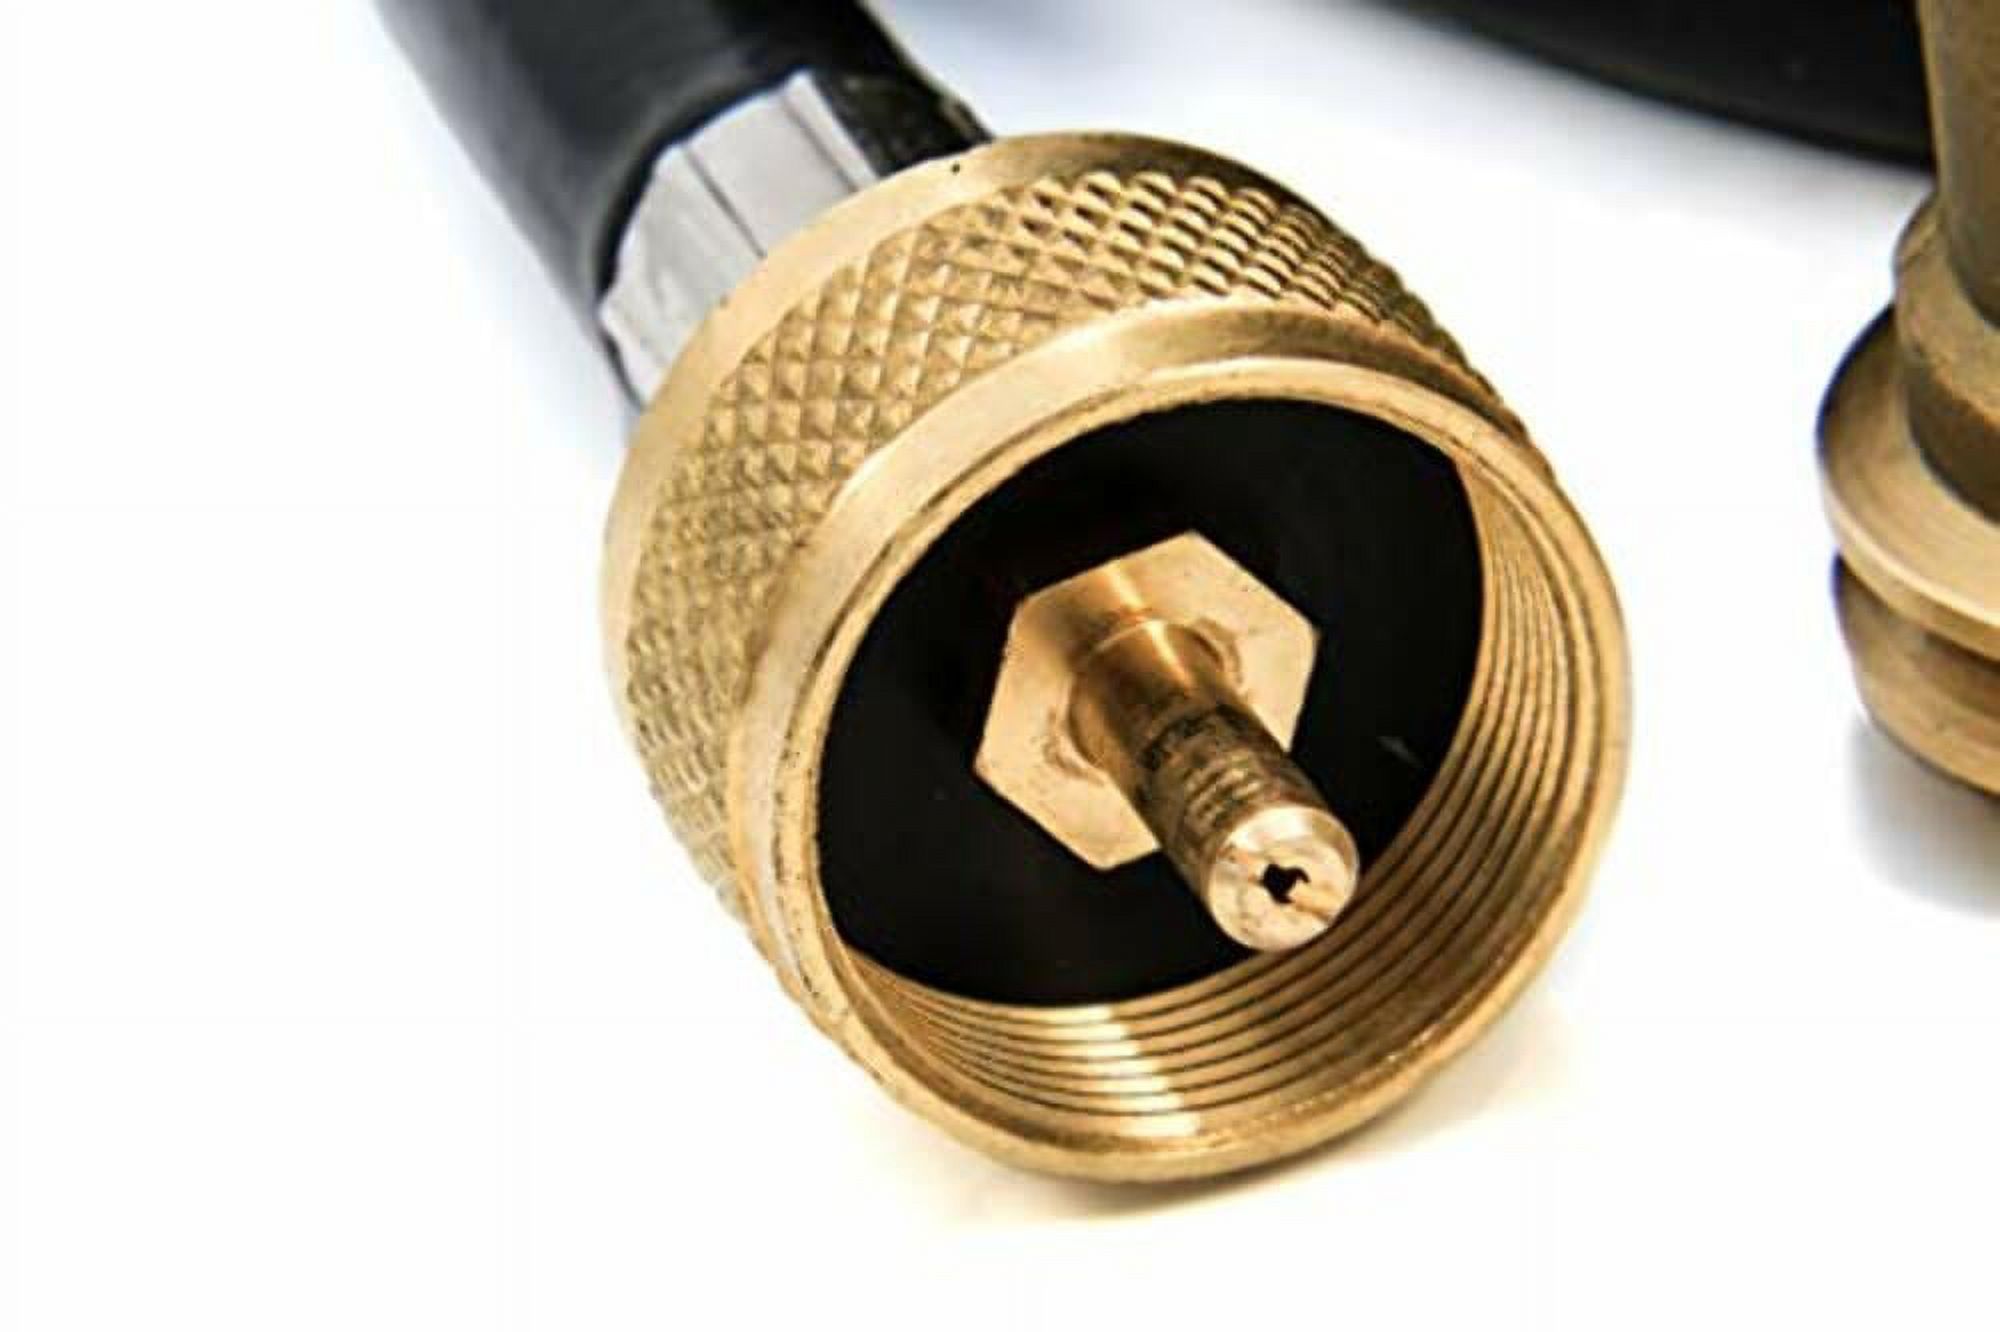 Camco Camper/RV Propane 3-Port Brass Tee with 12-Ft Propane Hose | Includes a Female POL, Excess Flow Soft Nose POL & 1"-20 Male Throwaway Cylinder Thread (59103) - image 5 of 10